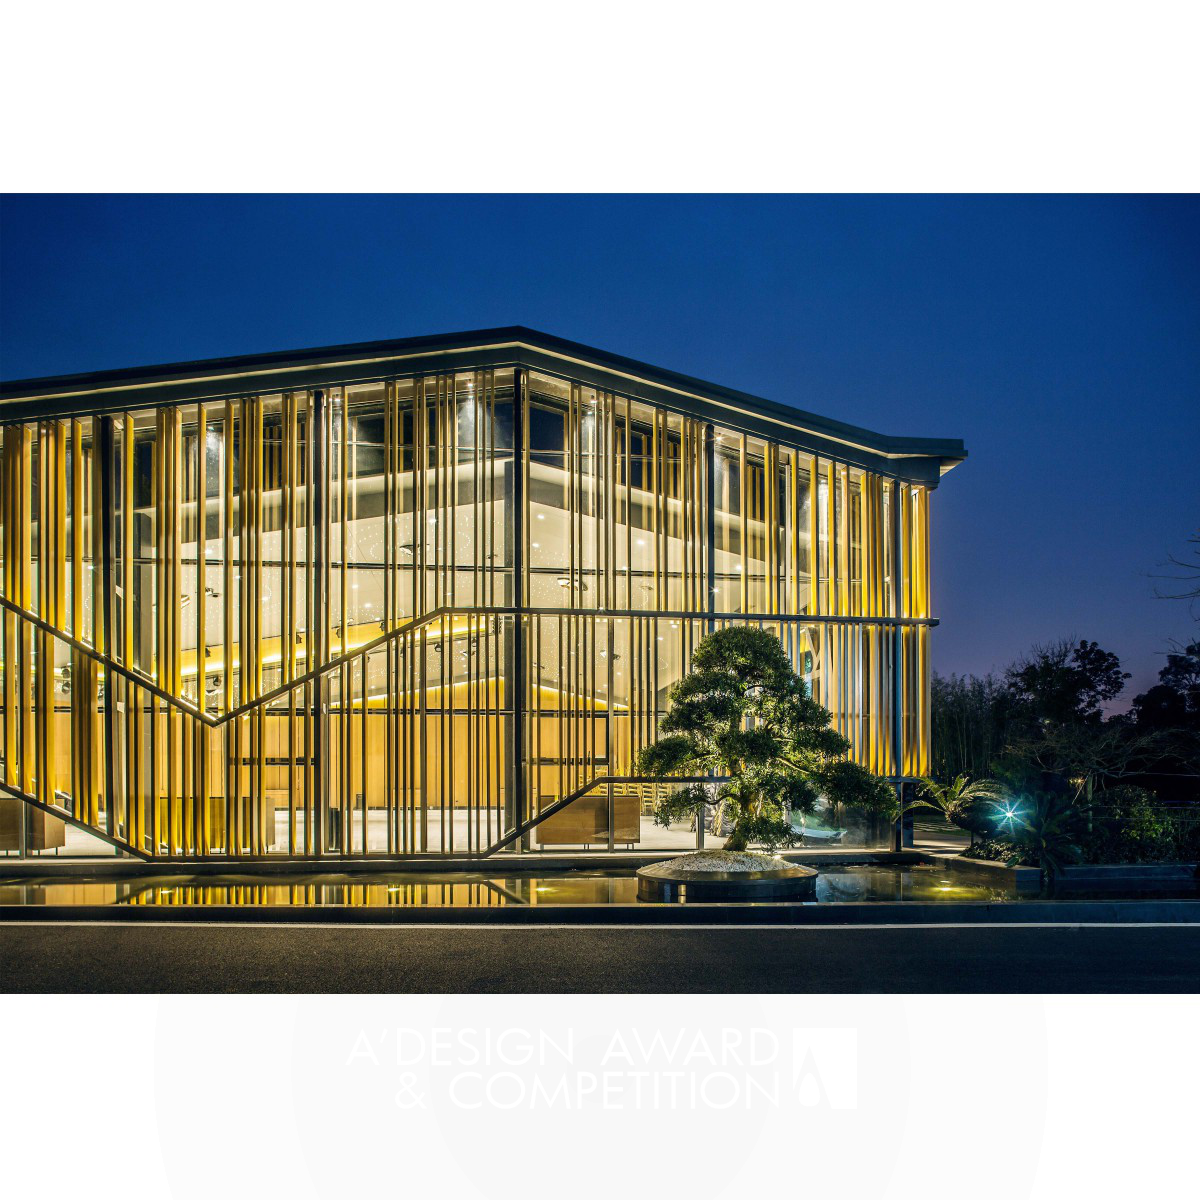 Impression Nanxi River Multifunctional hall by Ting Wang Platinum Architecture, Building and Structure Design Award Winner 2018 